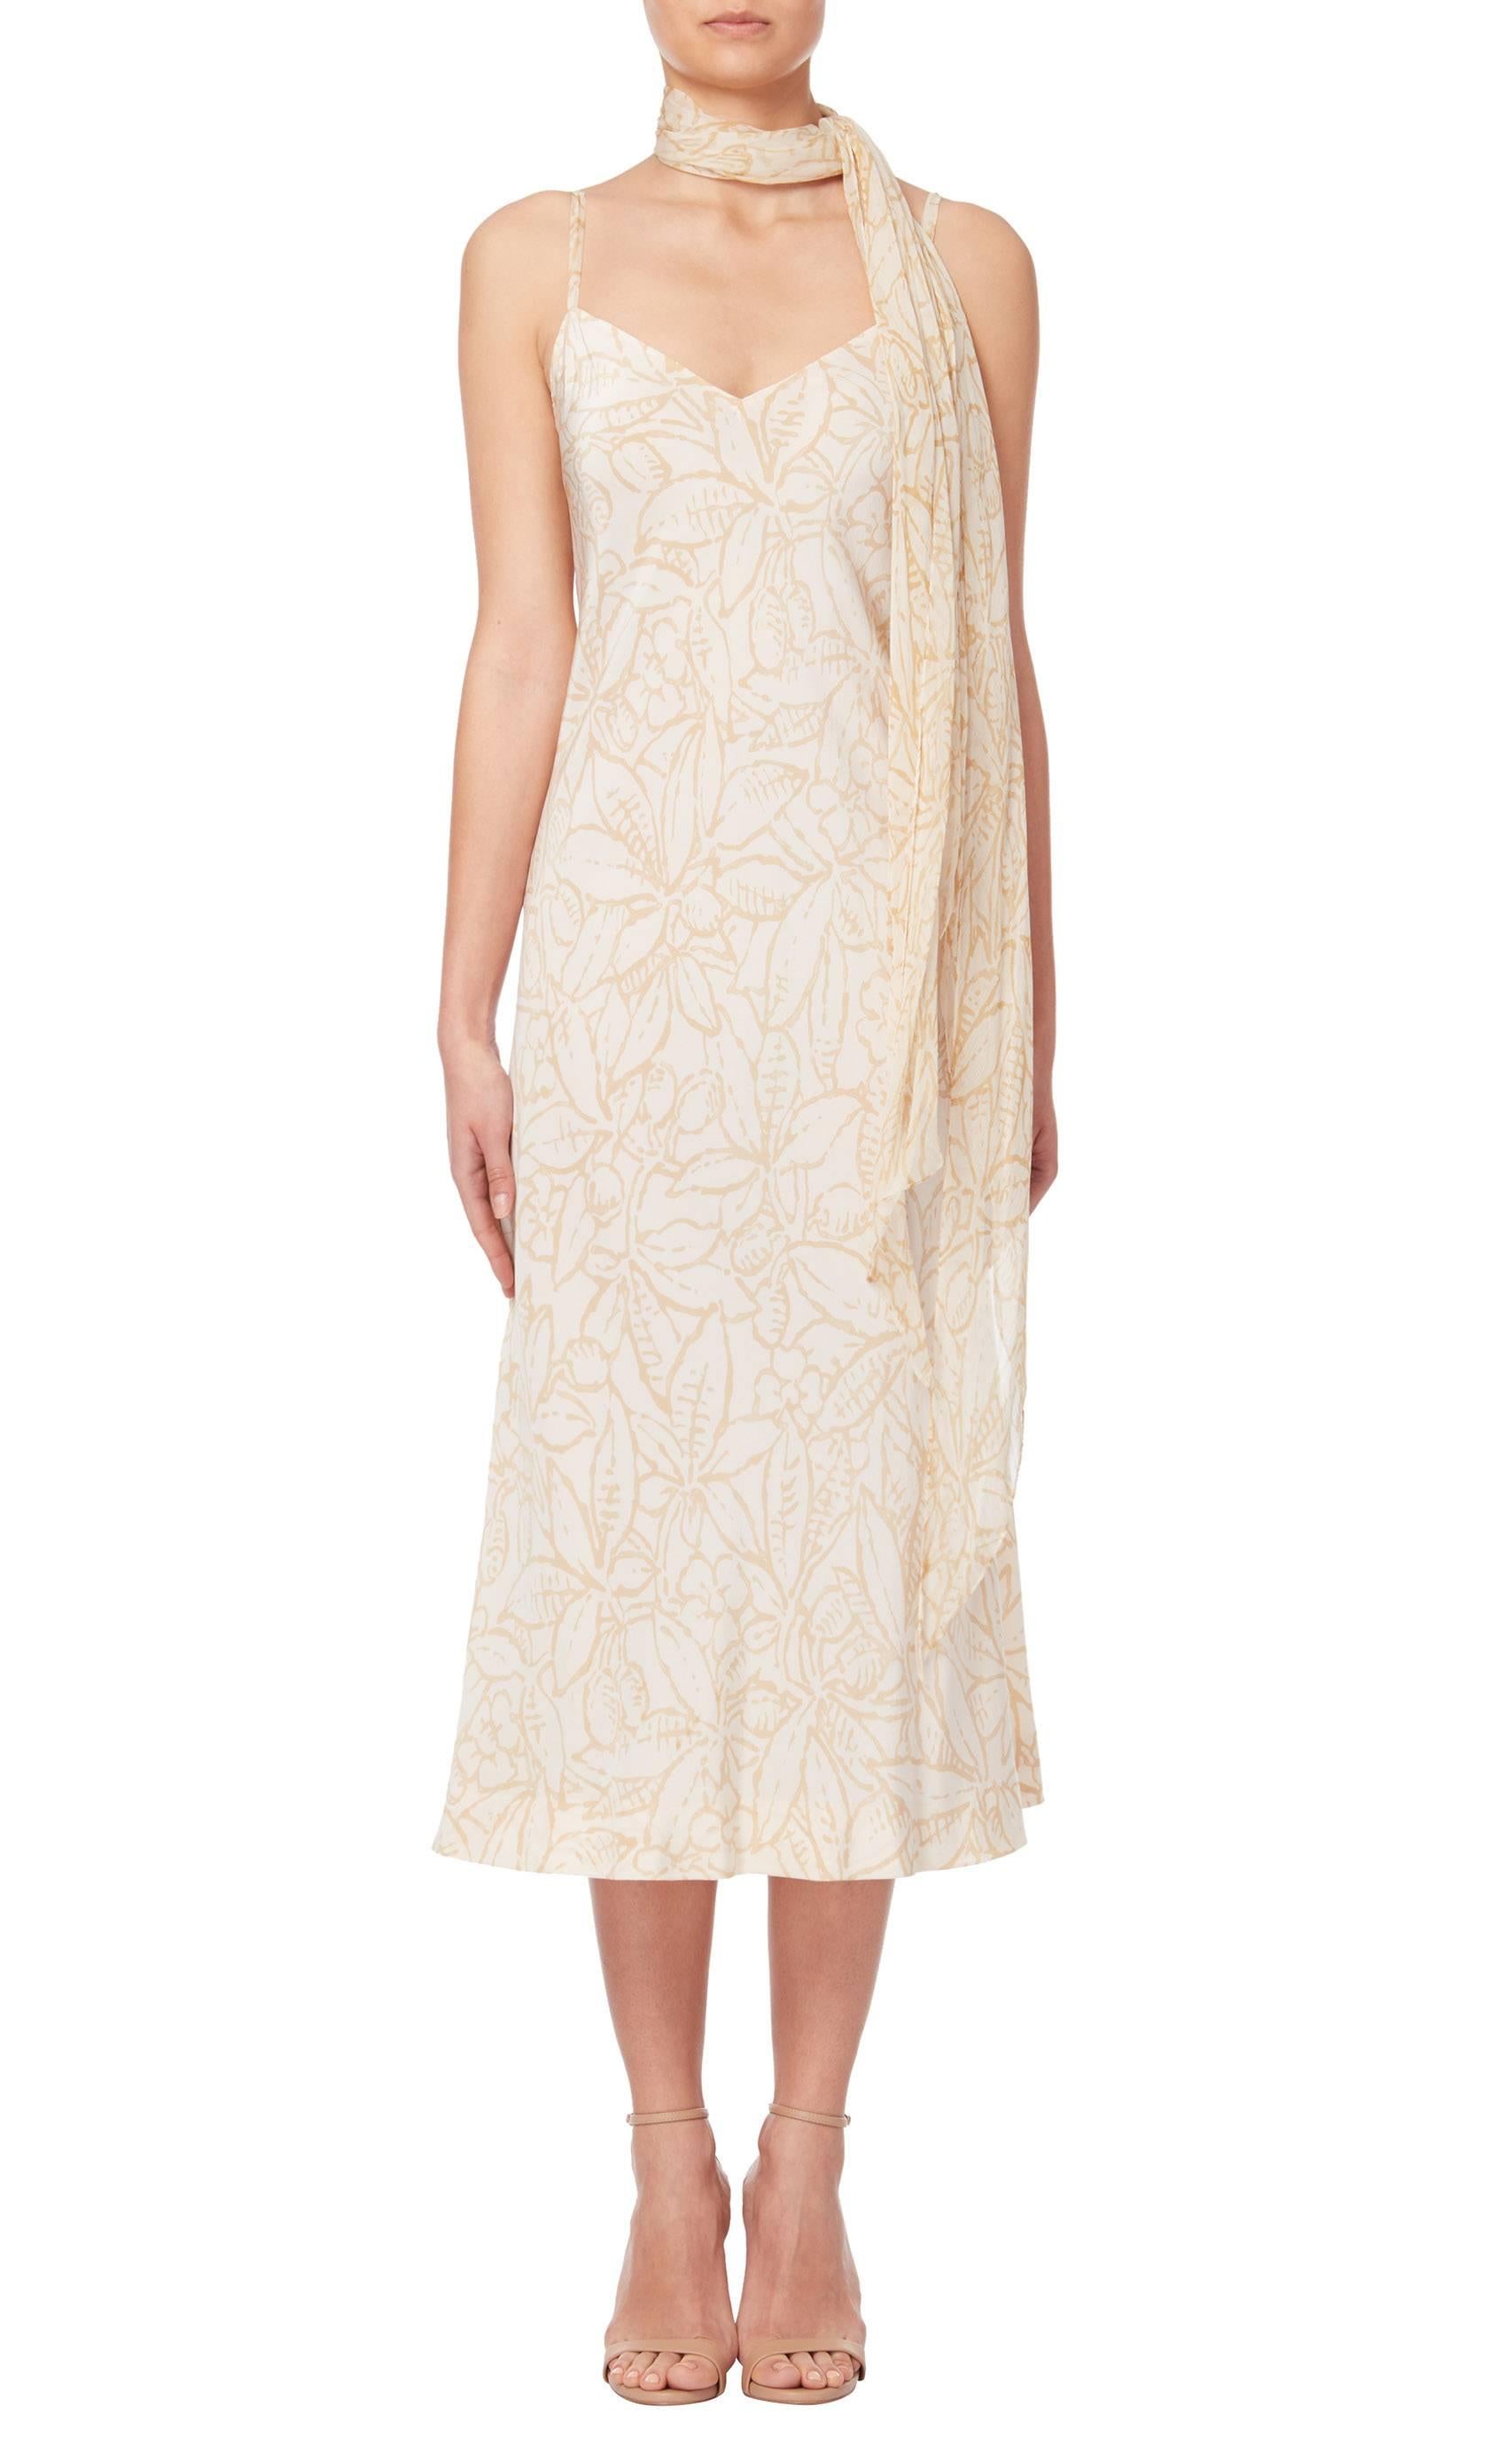 Constructed in ivory chiffon with a beige floral print, this Halston dress has a matching scarf that can be worn at the neck. With delicate straps and a v-neckline, this dress has a minimalist aesthetic. 